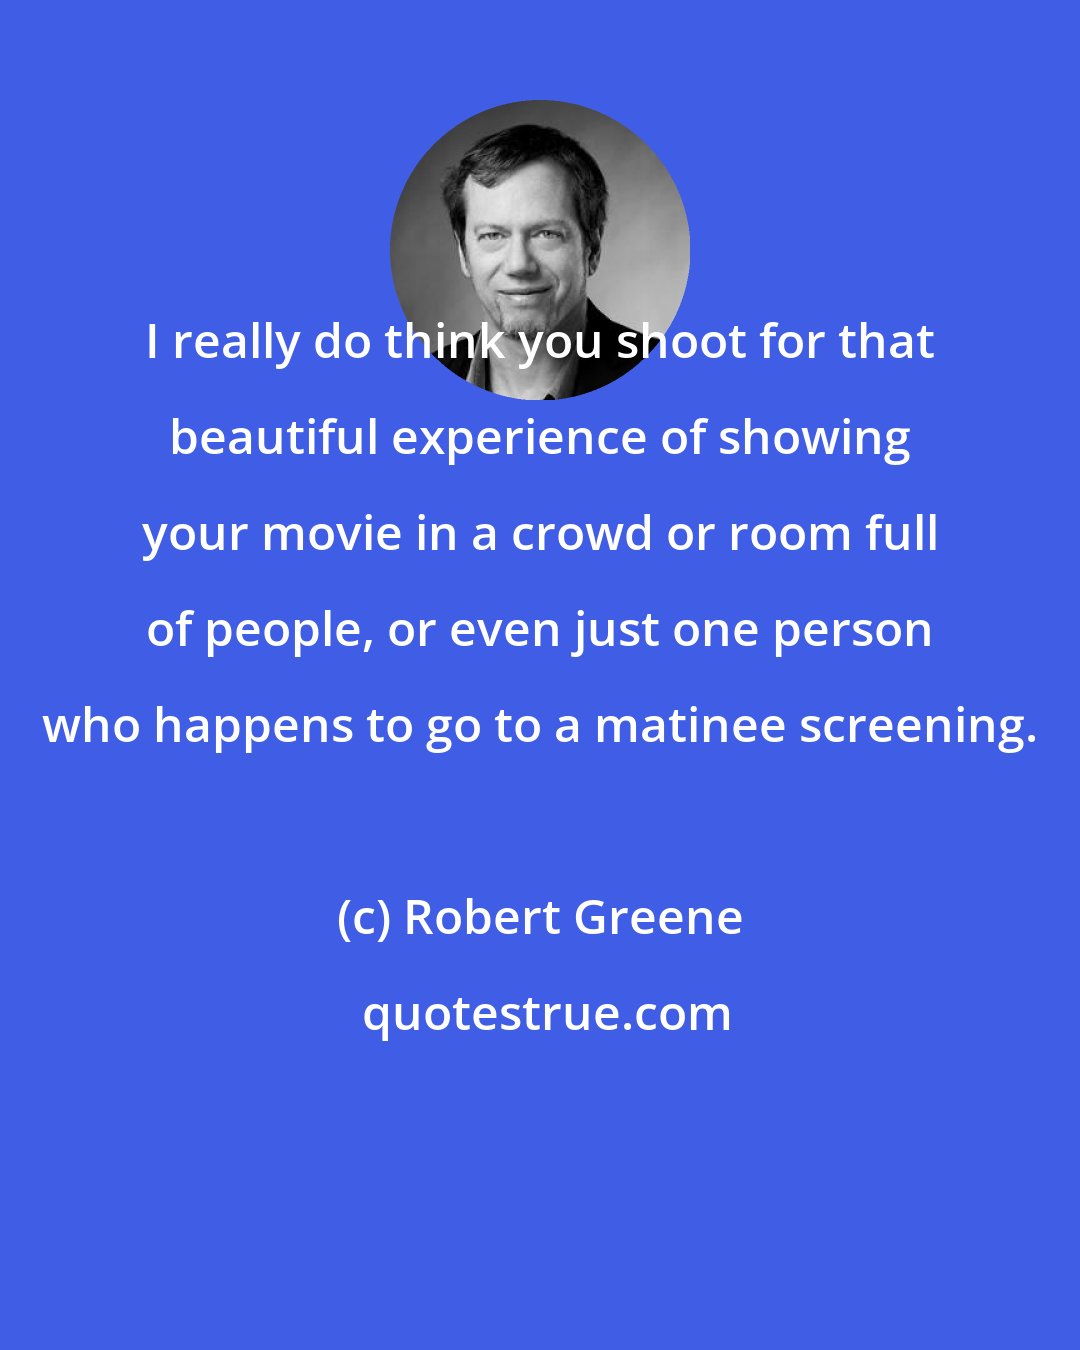 Robert Greene: I really do think you shoot for that beautiful experience of showing your movie in a crowd or room full of people, or even just one person who happens to go to a matinee screening.